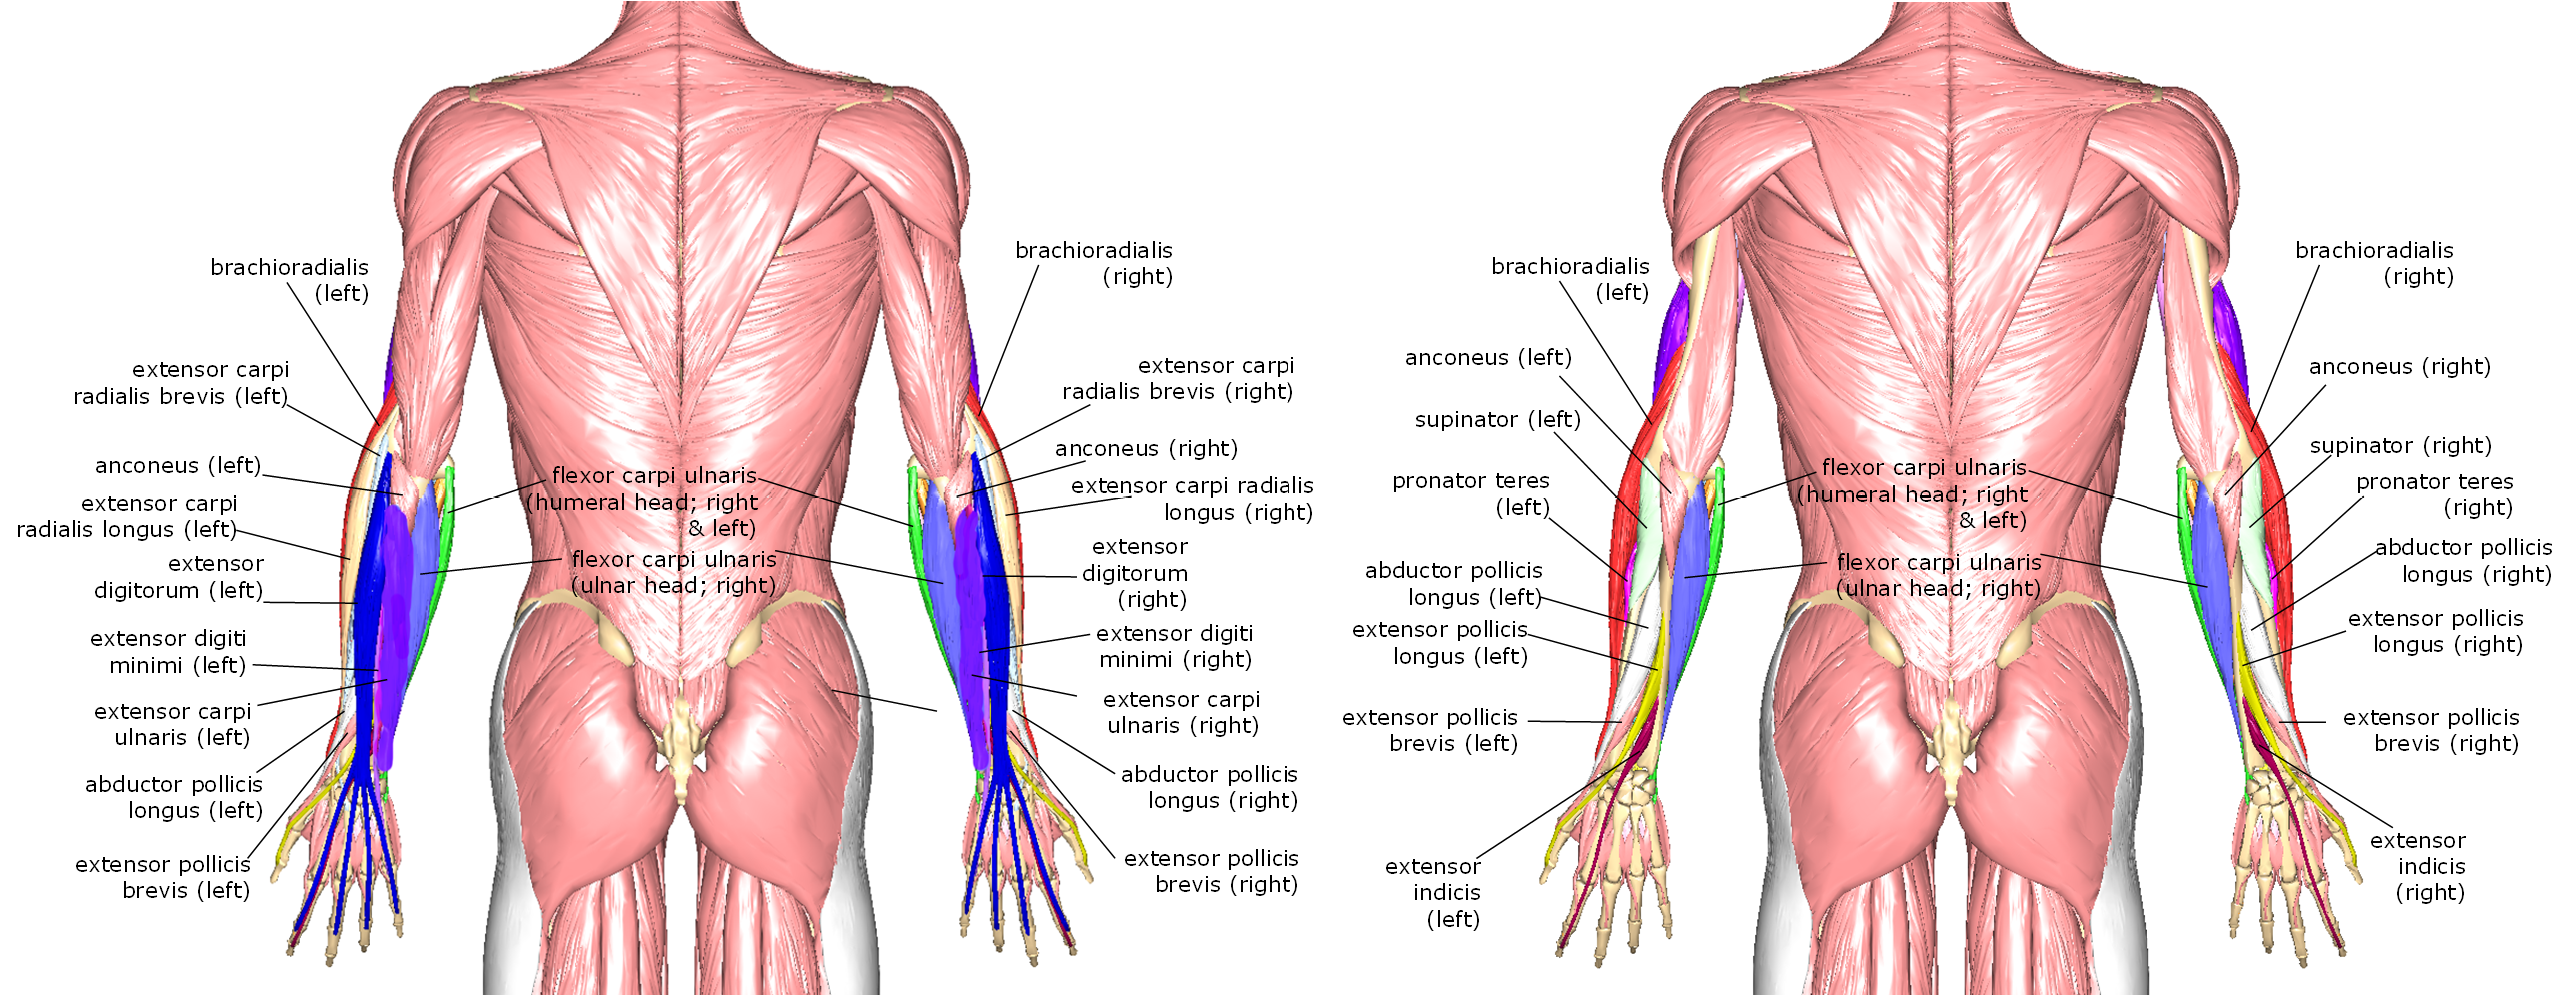 Posterior muscles of the forearm